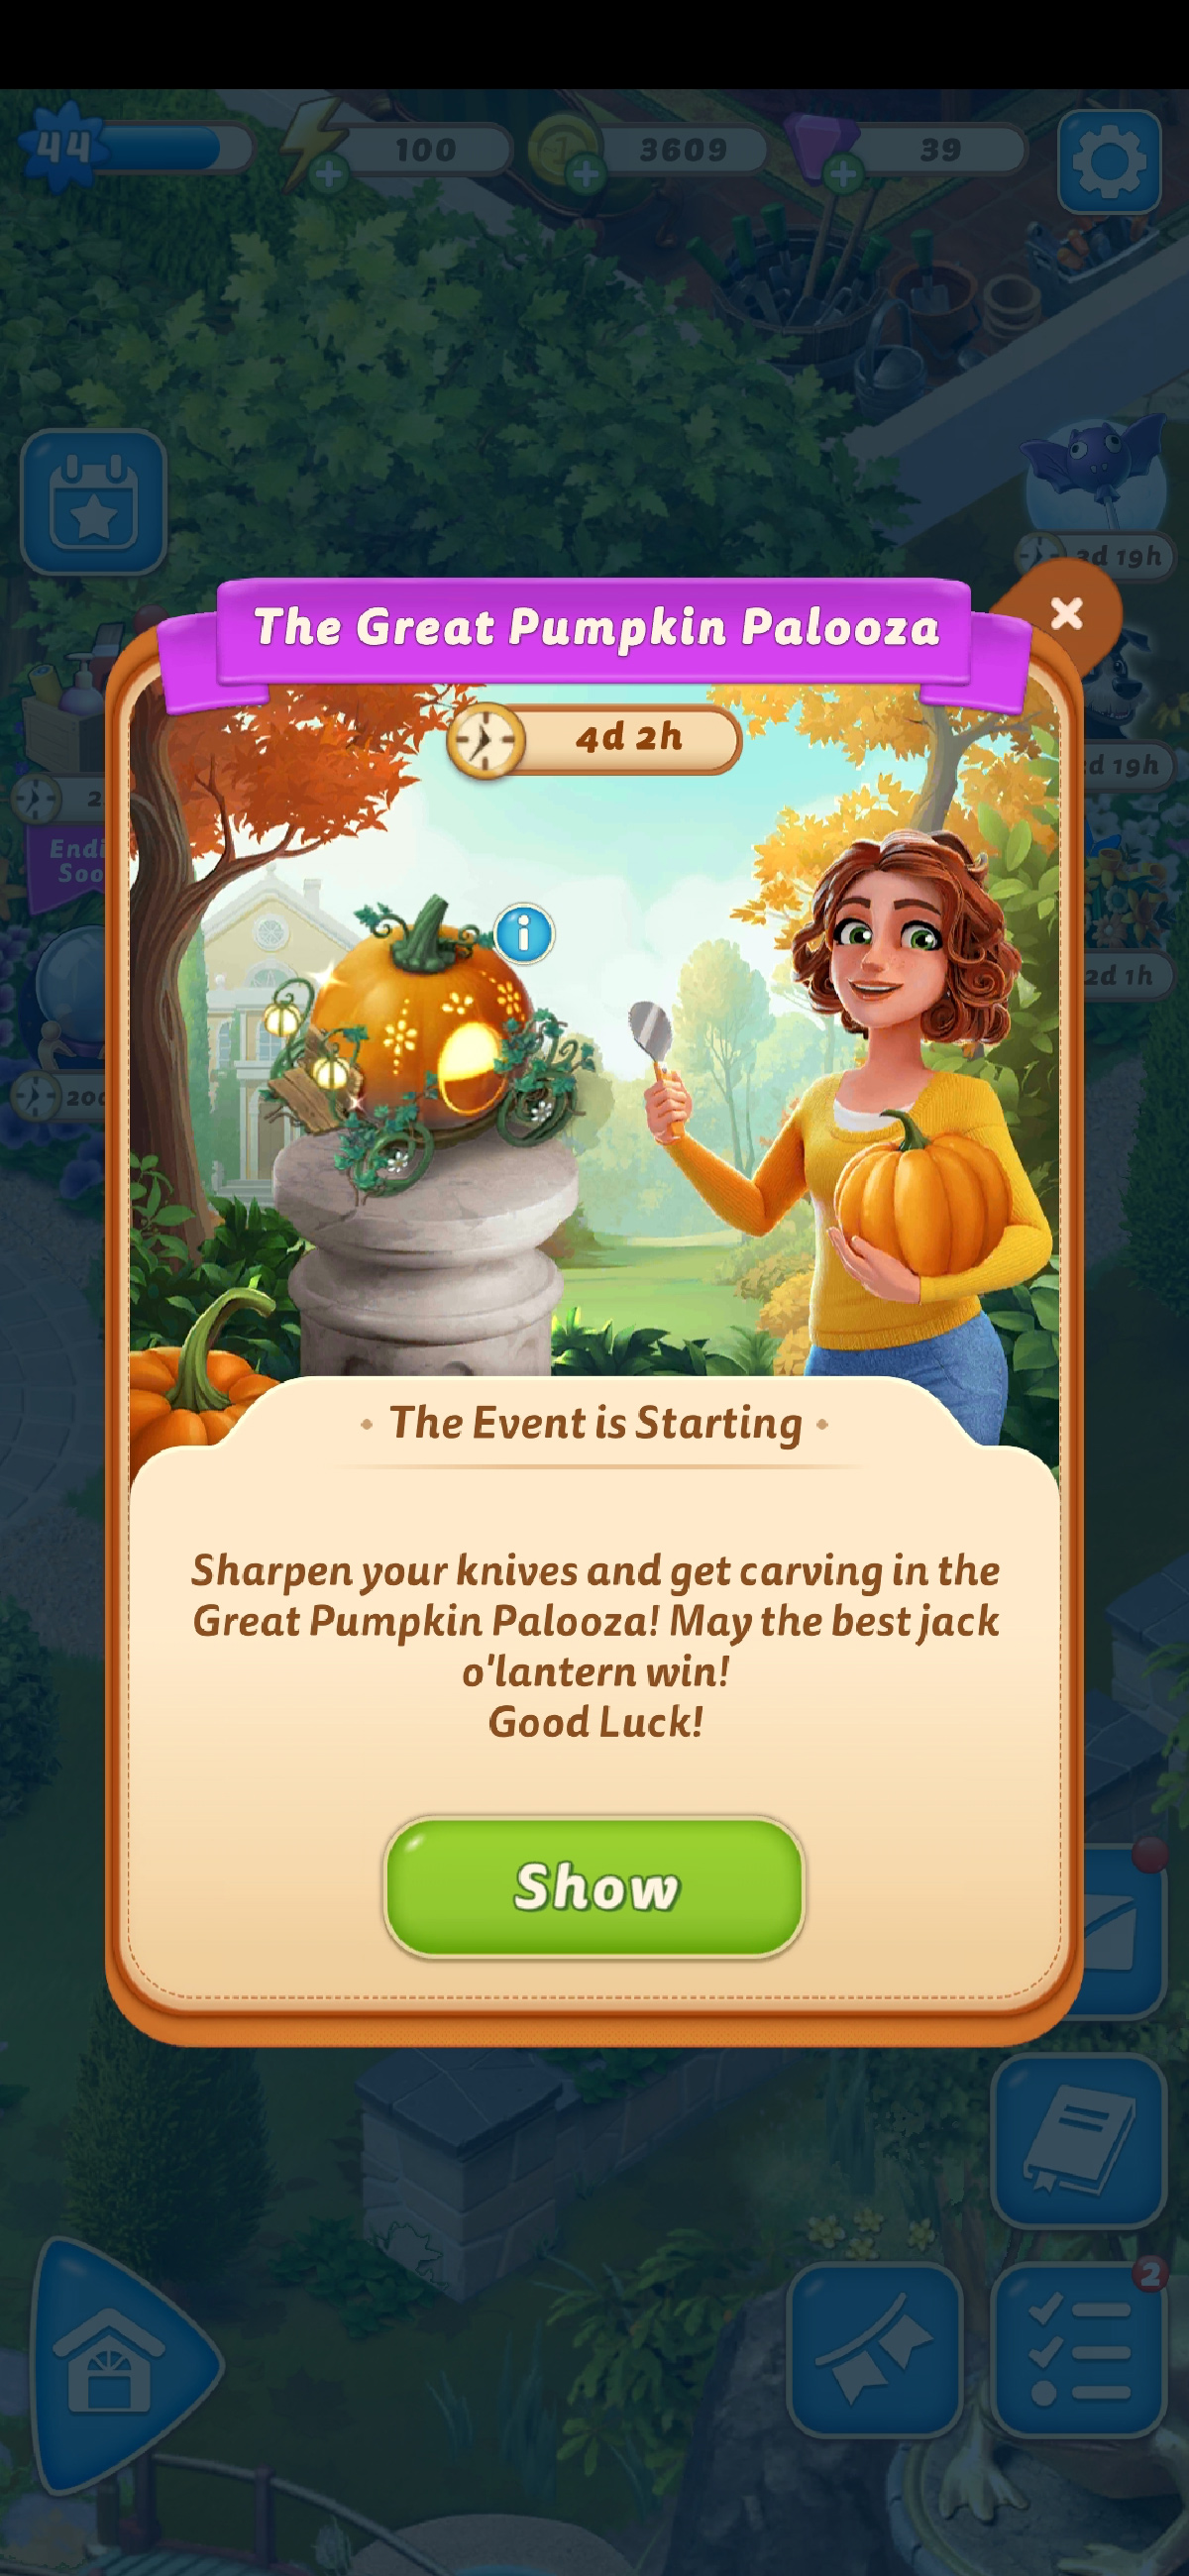 Image from Merge Mansion showing text for The Great Pumpkin Palooza event works as part of an article explaining all the rewards and how to win at the event.